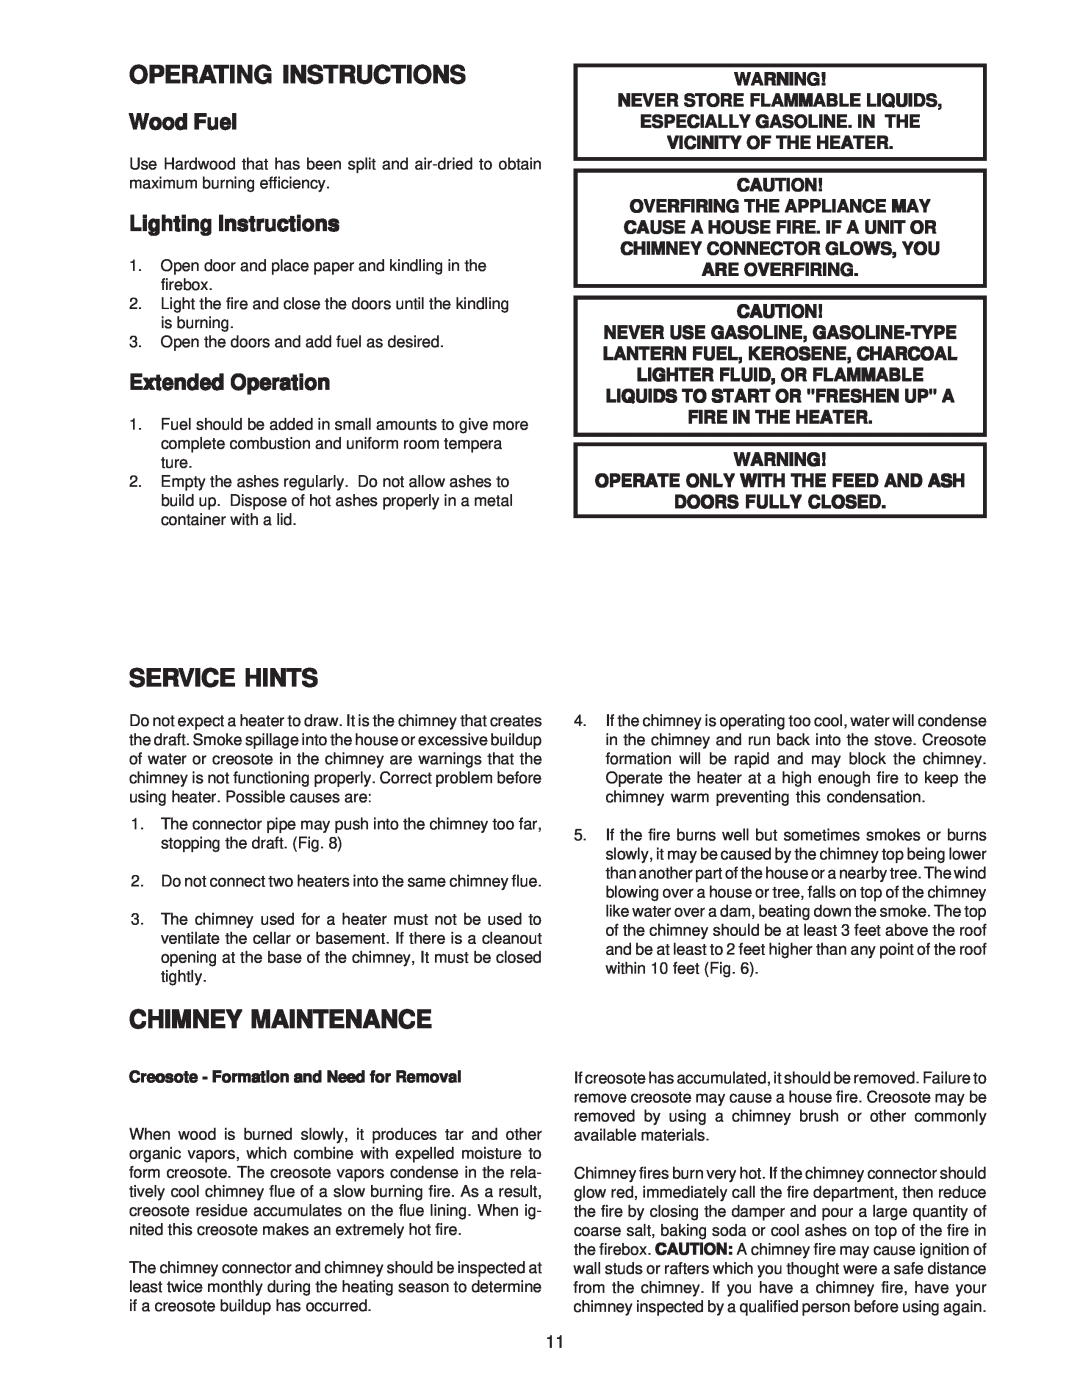 United States Stove 2007 Operating Instructions, Service Hints, Chimney Maintenance, Never Store Flammable Liquids 